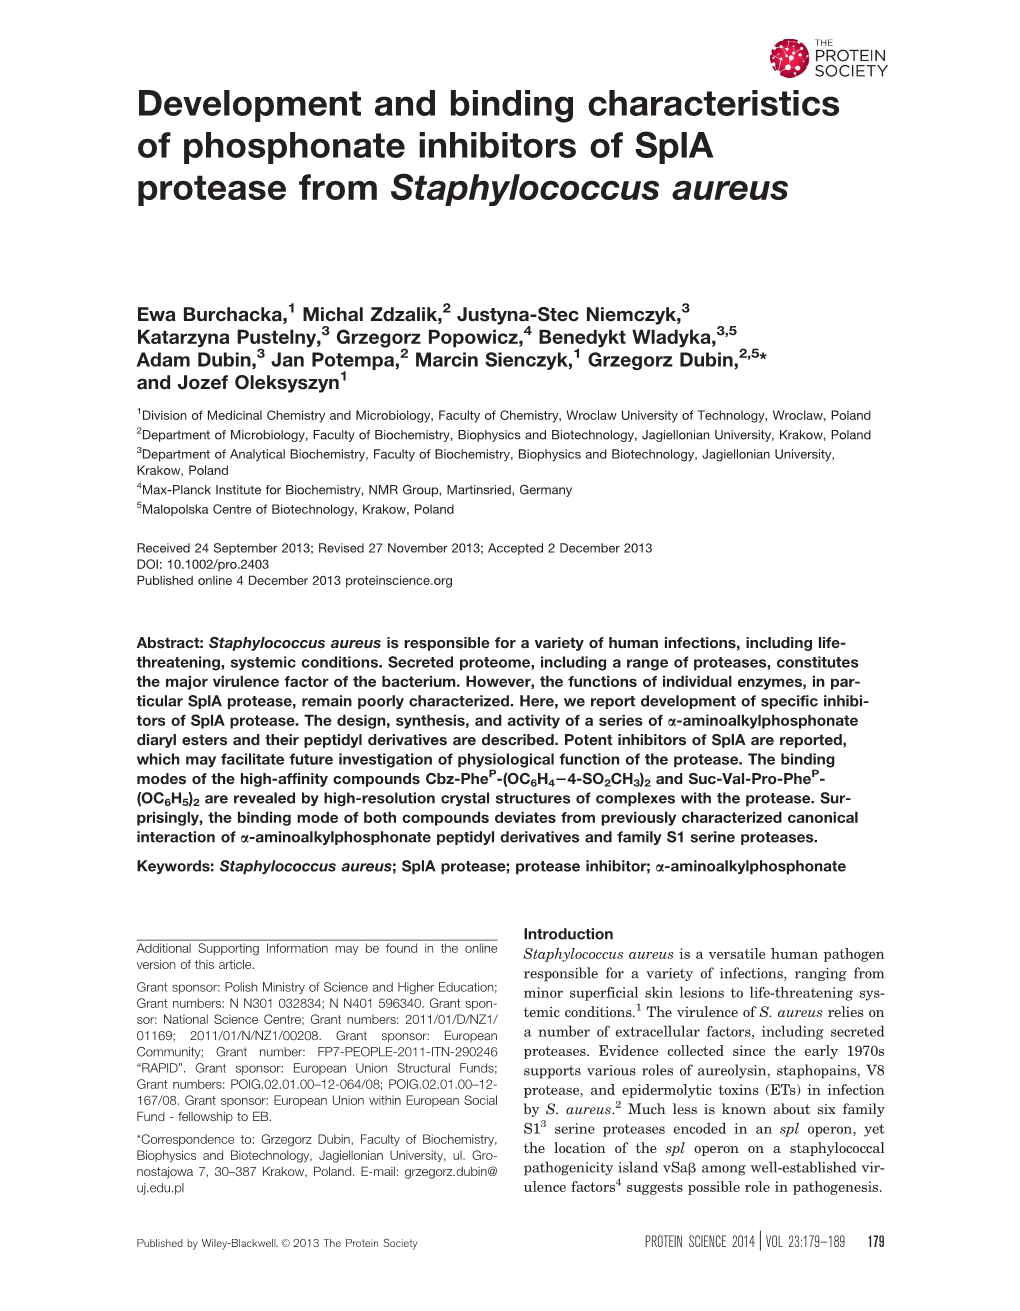 Development and Binding Characteristics of Phosphonate Inhibitors of Spla Protease from Staphylococcus Aureus